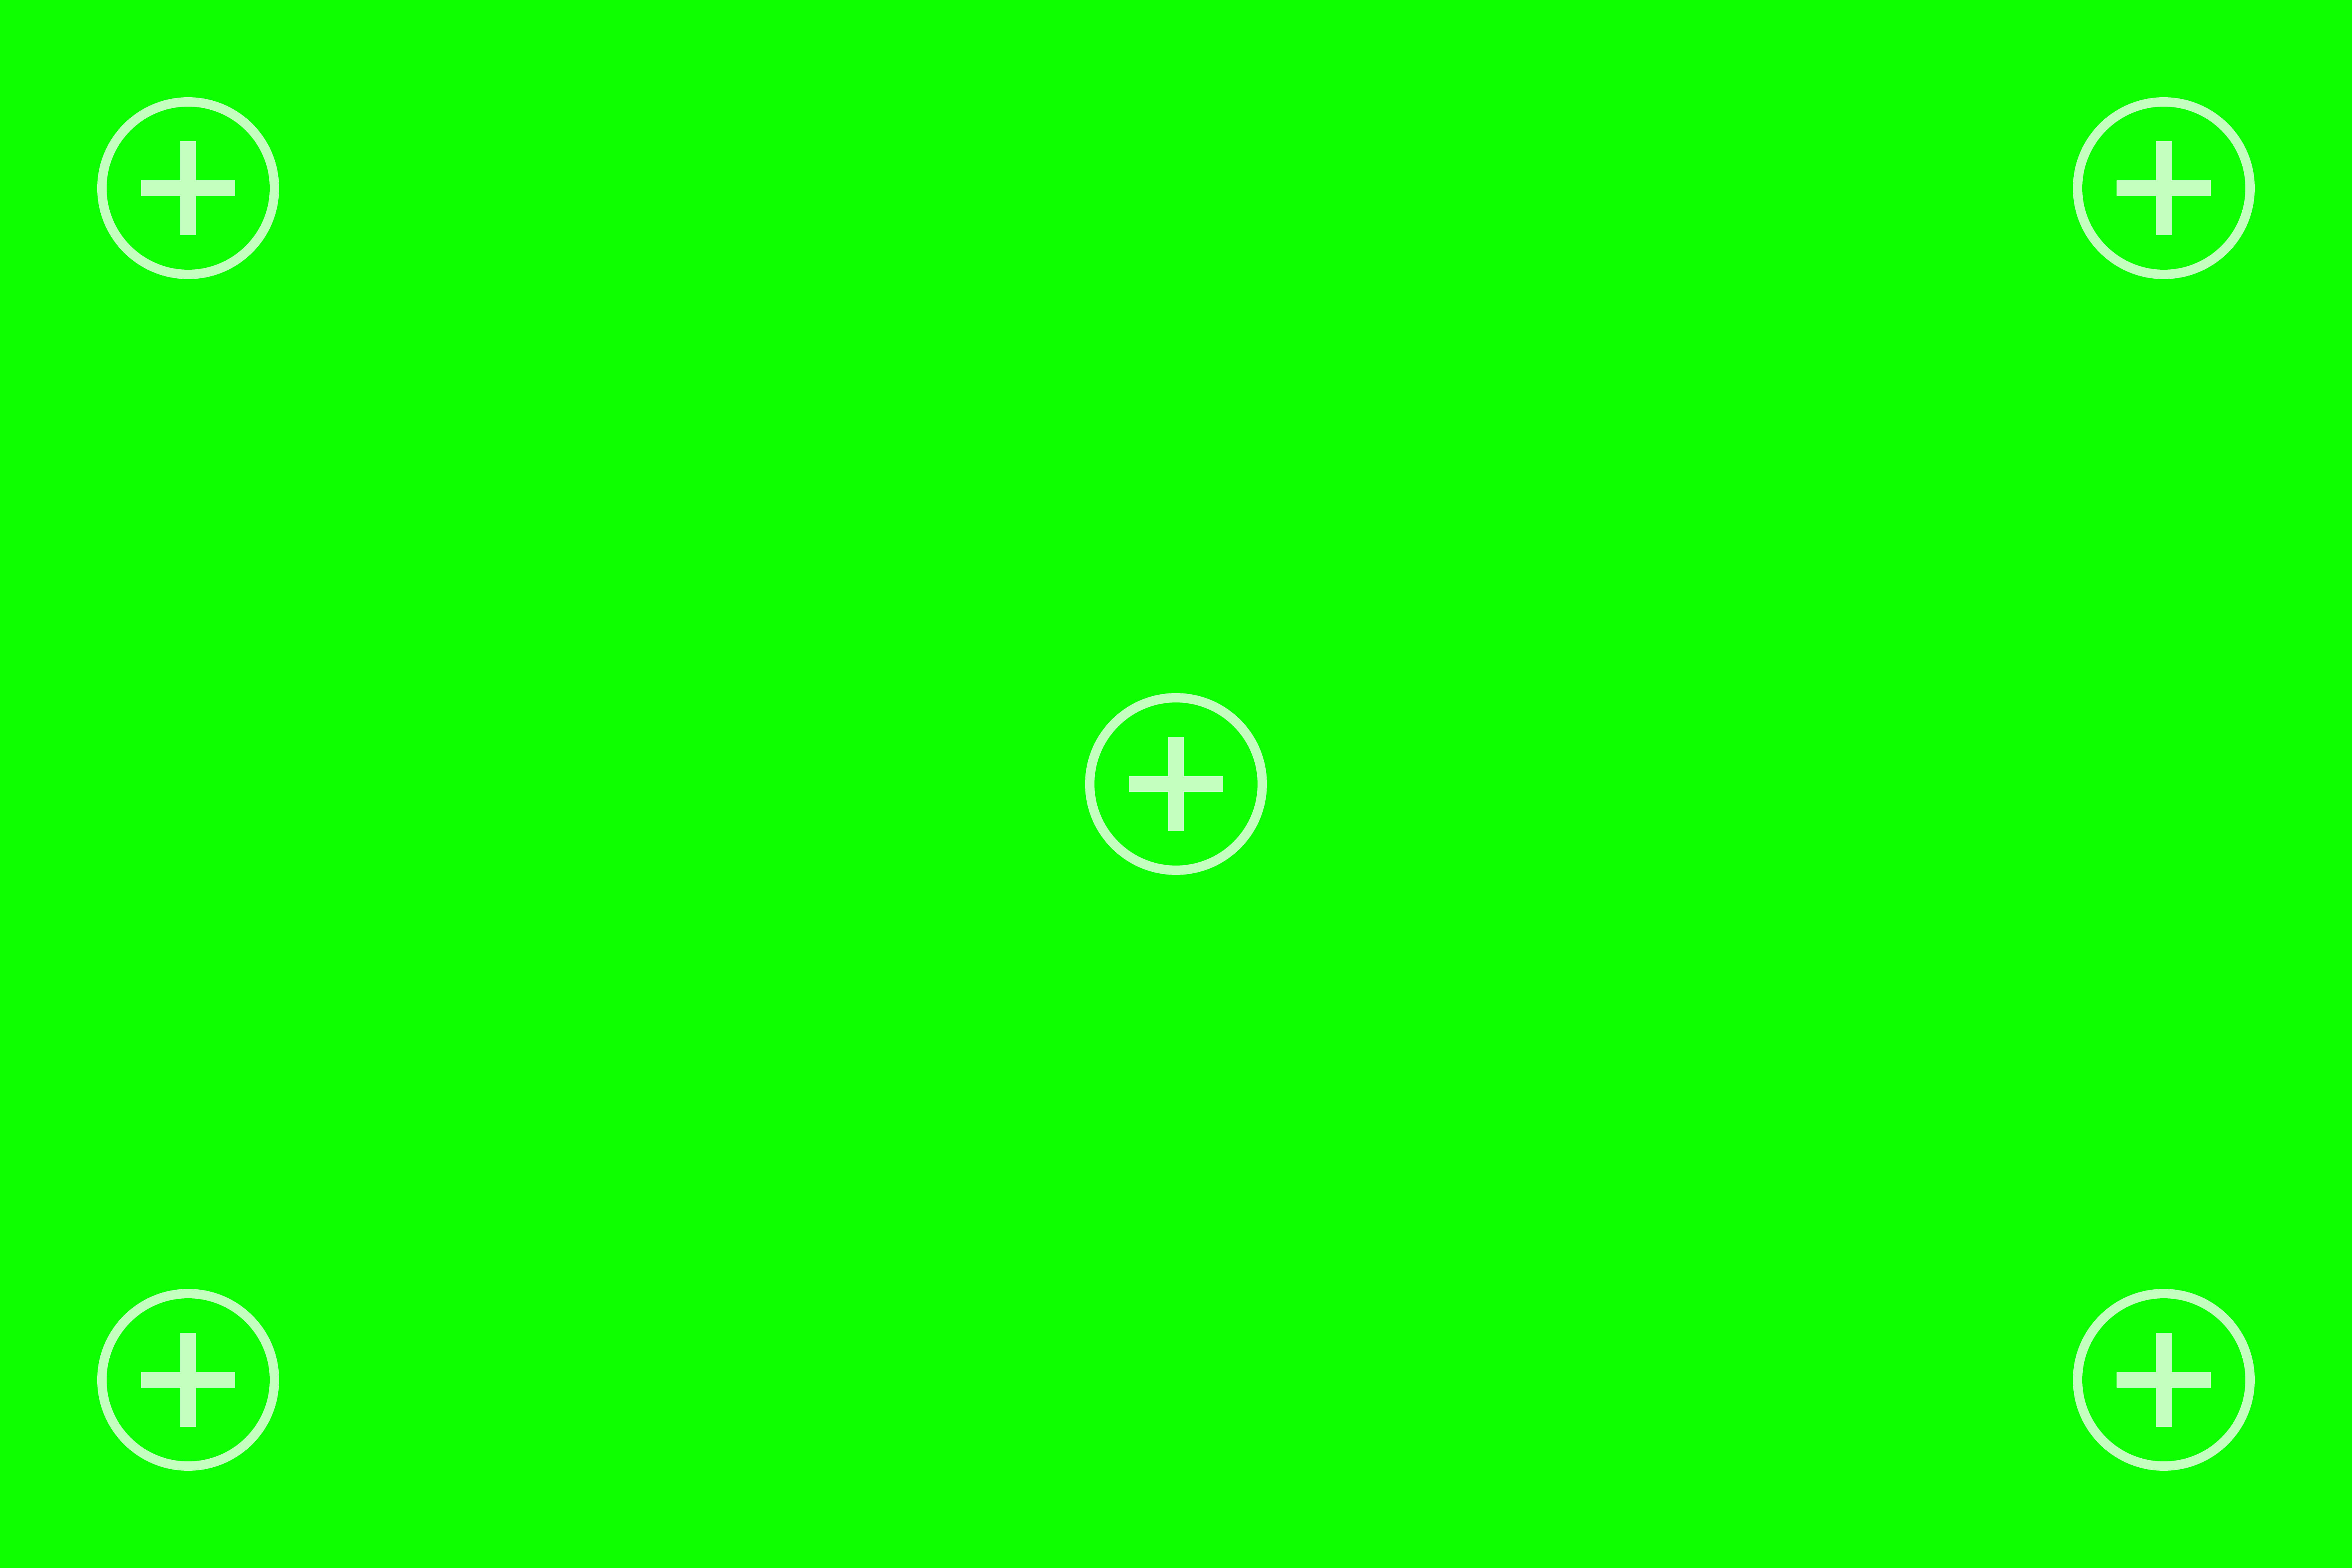 Green screen chroma key background. Vector illustration. Green screen chroma key background Template for your design